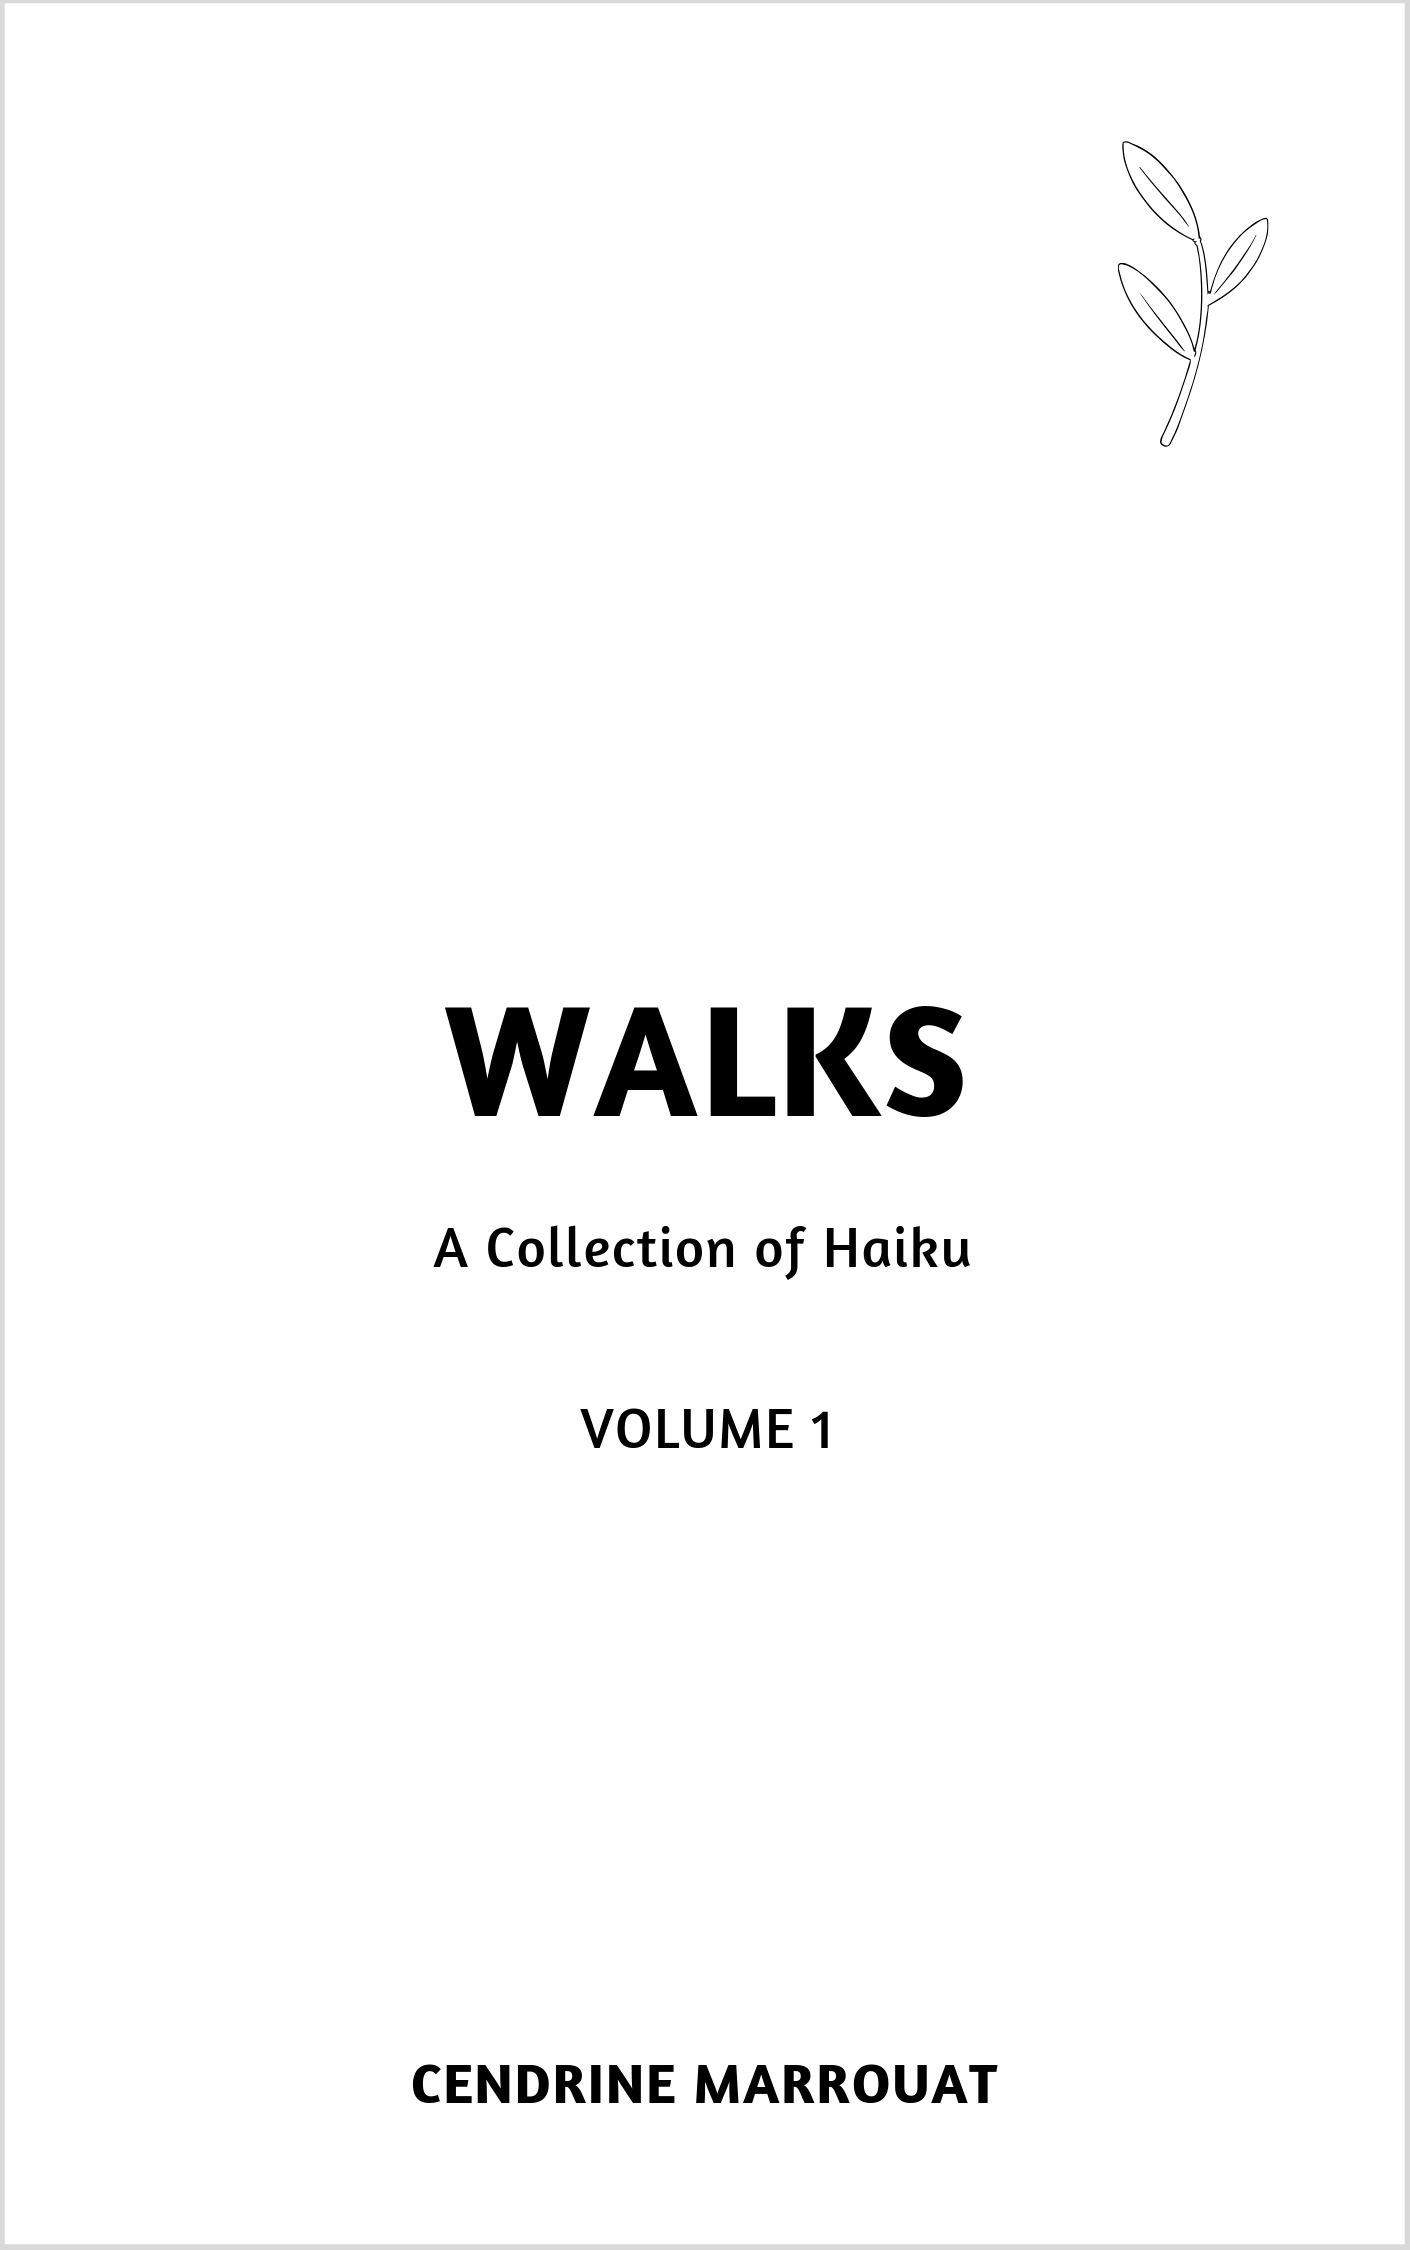 Walks: A Collection of Haiku (Volume 1) Cendrine Marrouat Book Cover